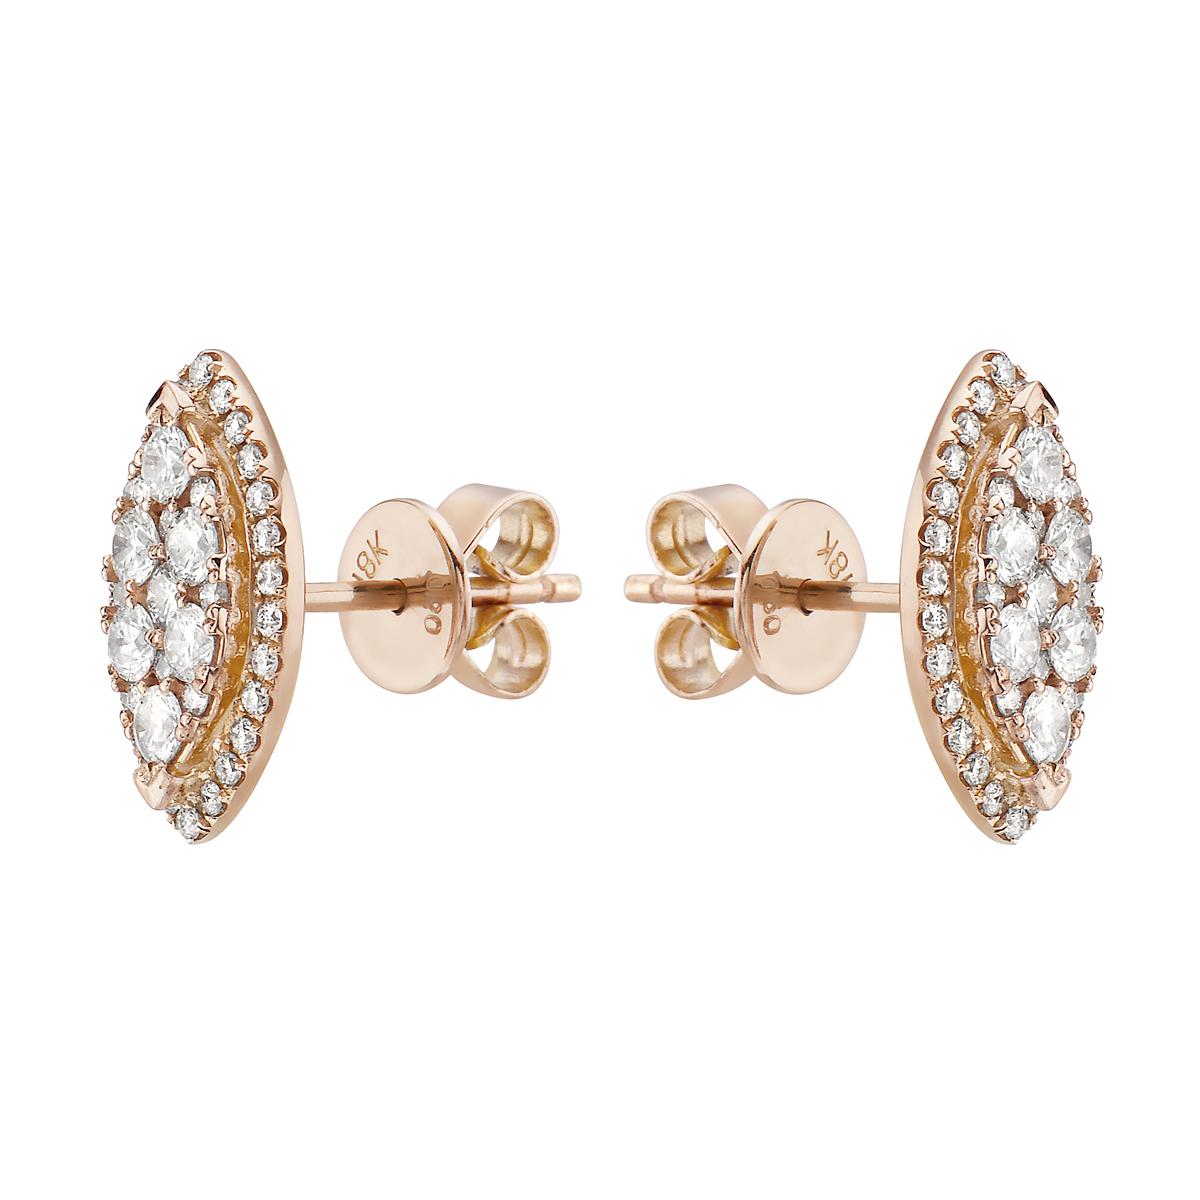 With these exquisite rose gold illusion diamond marquise-shaped earrings, style and glamour are in the spotlight. These 18-karat earrings are made from 3.0 grams of gold. These earrings are adorned with VS2-SI1, G color diamonds, made out of 82